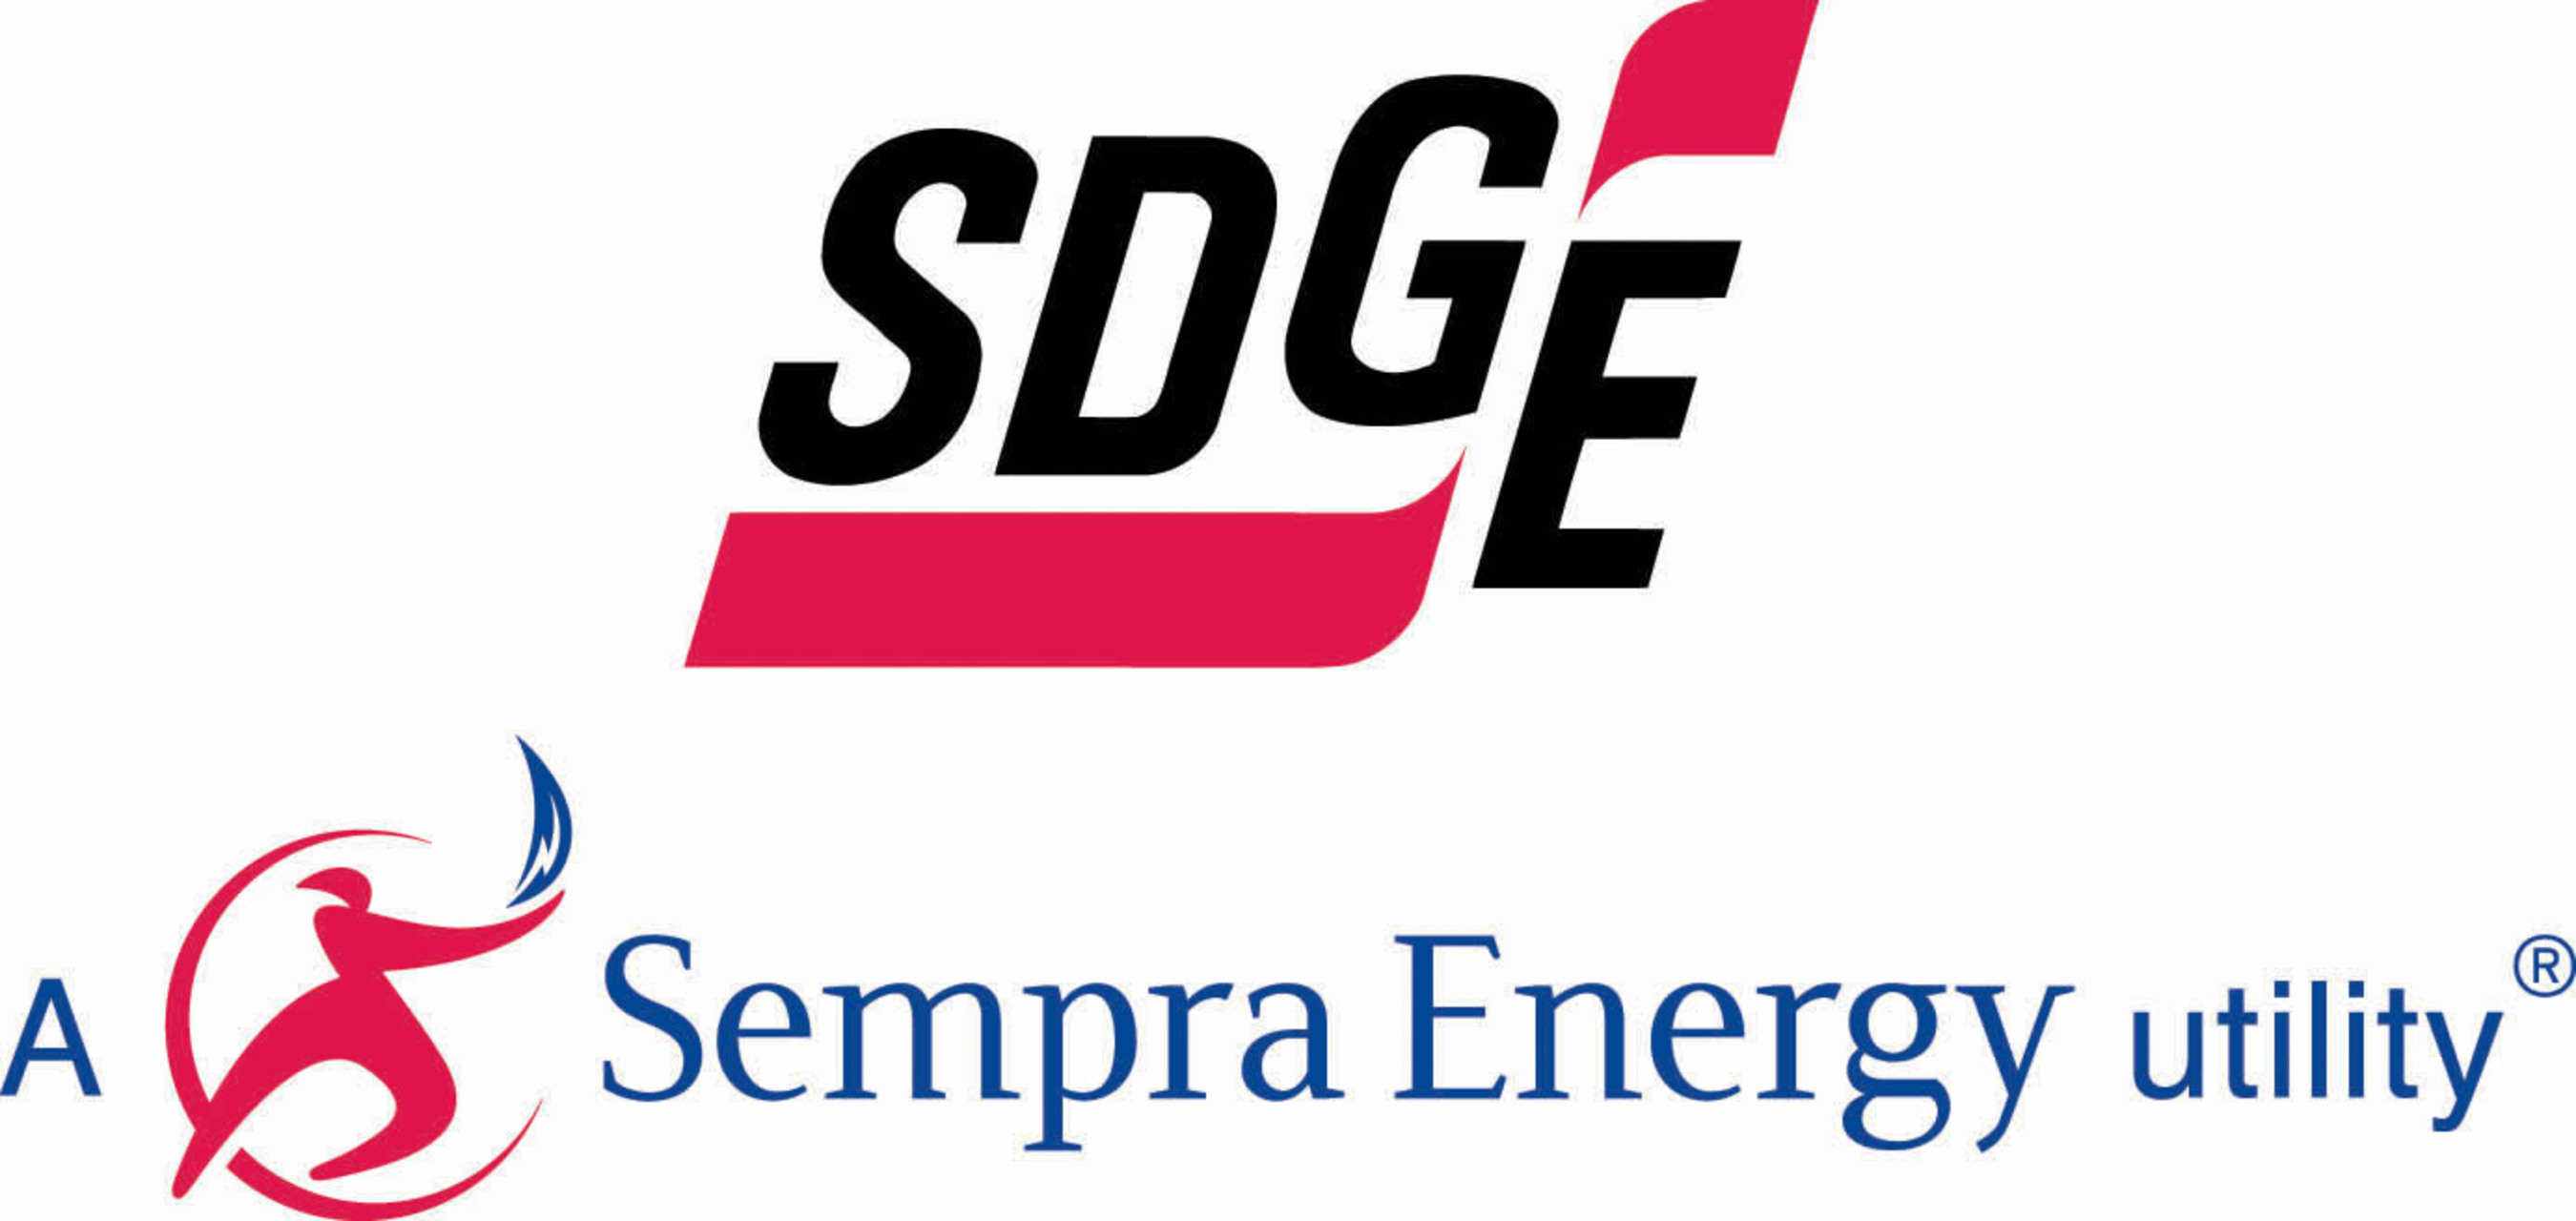 SDG&E is a regulated public utility that provides safe and reliable energy service to 3.4 million consumers through 1.4 million electric meters and 861,000 natural gas meters in San Diego and southern Orange counties. The utilityâeuro(TM)s area spans 4,100 square miles. SDG&E is committed to creating ways to help customers save energy and money every day. SDG&E is a subsidiary of Sempra Energy (NYSE: SRE), a Fortune 500 energy services holding company based in San Diego. Connect with SDG&Eâeuro(TM)s Customer Contact Center at 800-411-7343, on Twitter (@SDGE) and Facebook. (PRNewsFoto/SDG&E) (PRNewsFoto/)